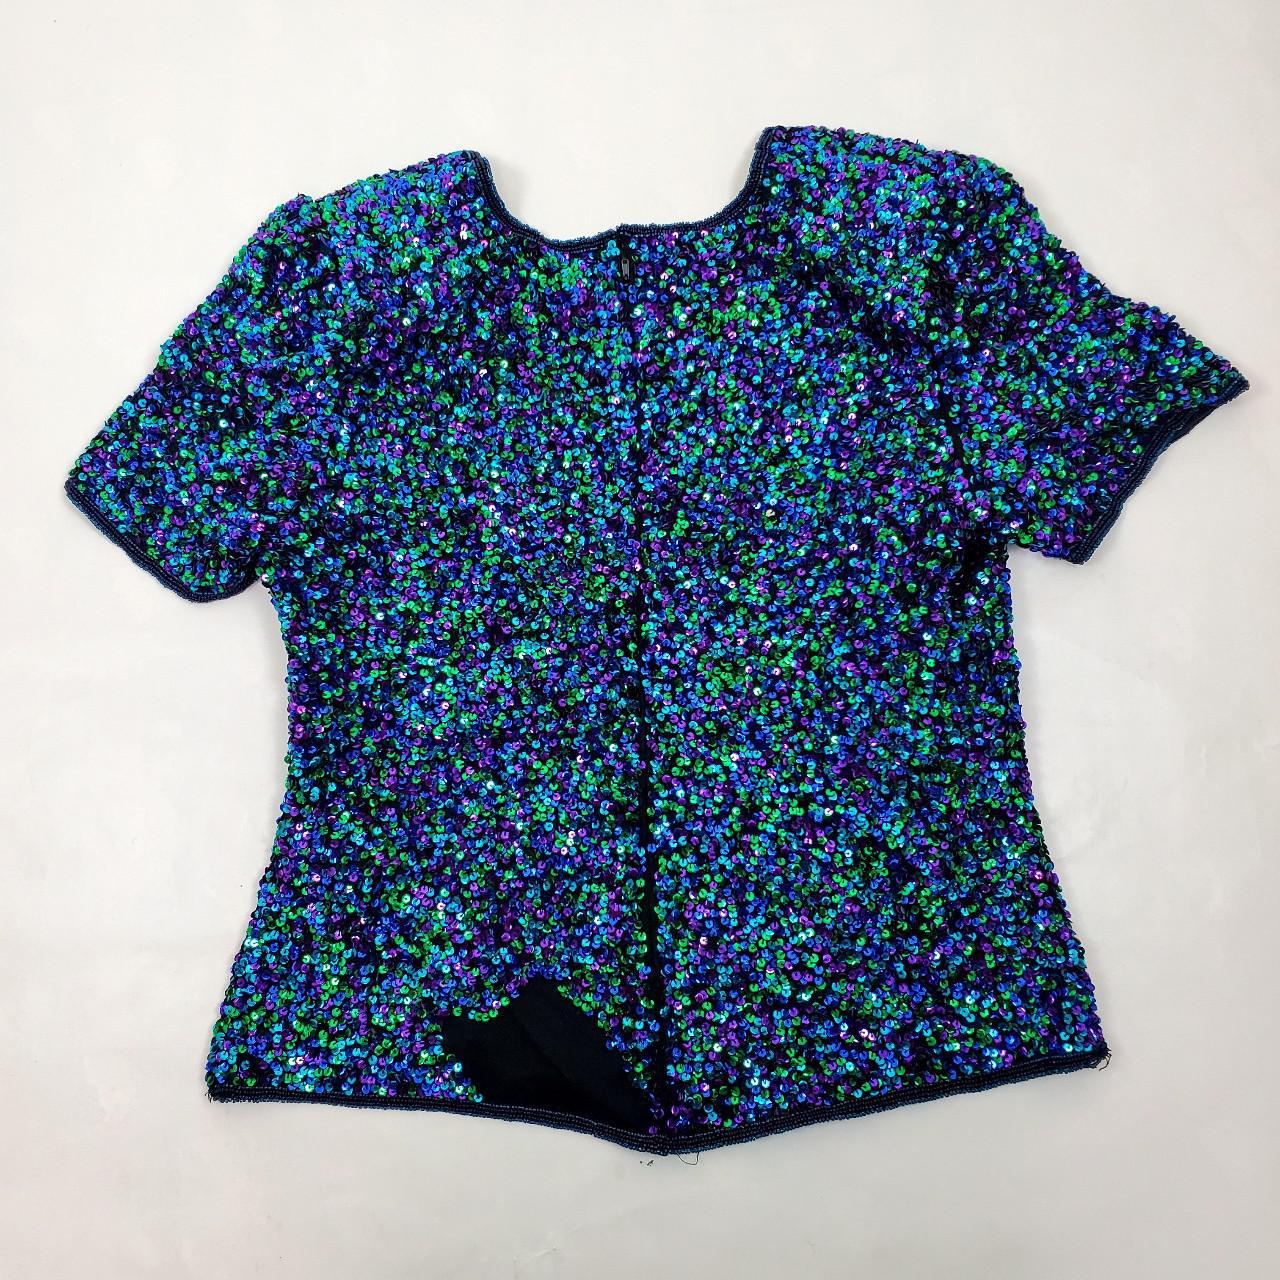 Product Image 2 - Party monster sequin blouse. 

Got